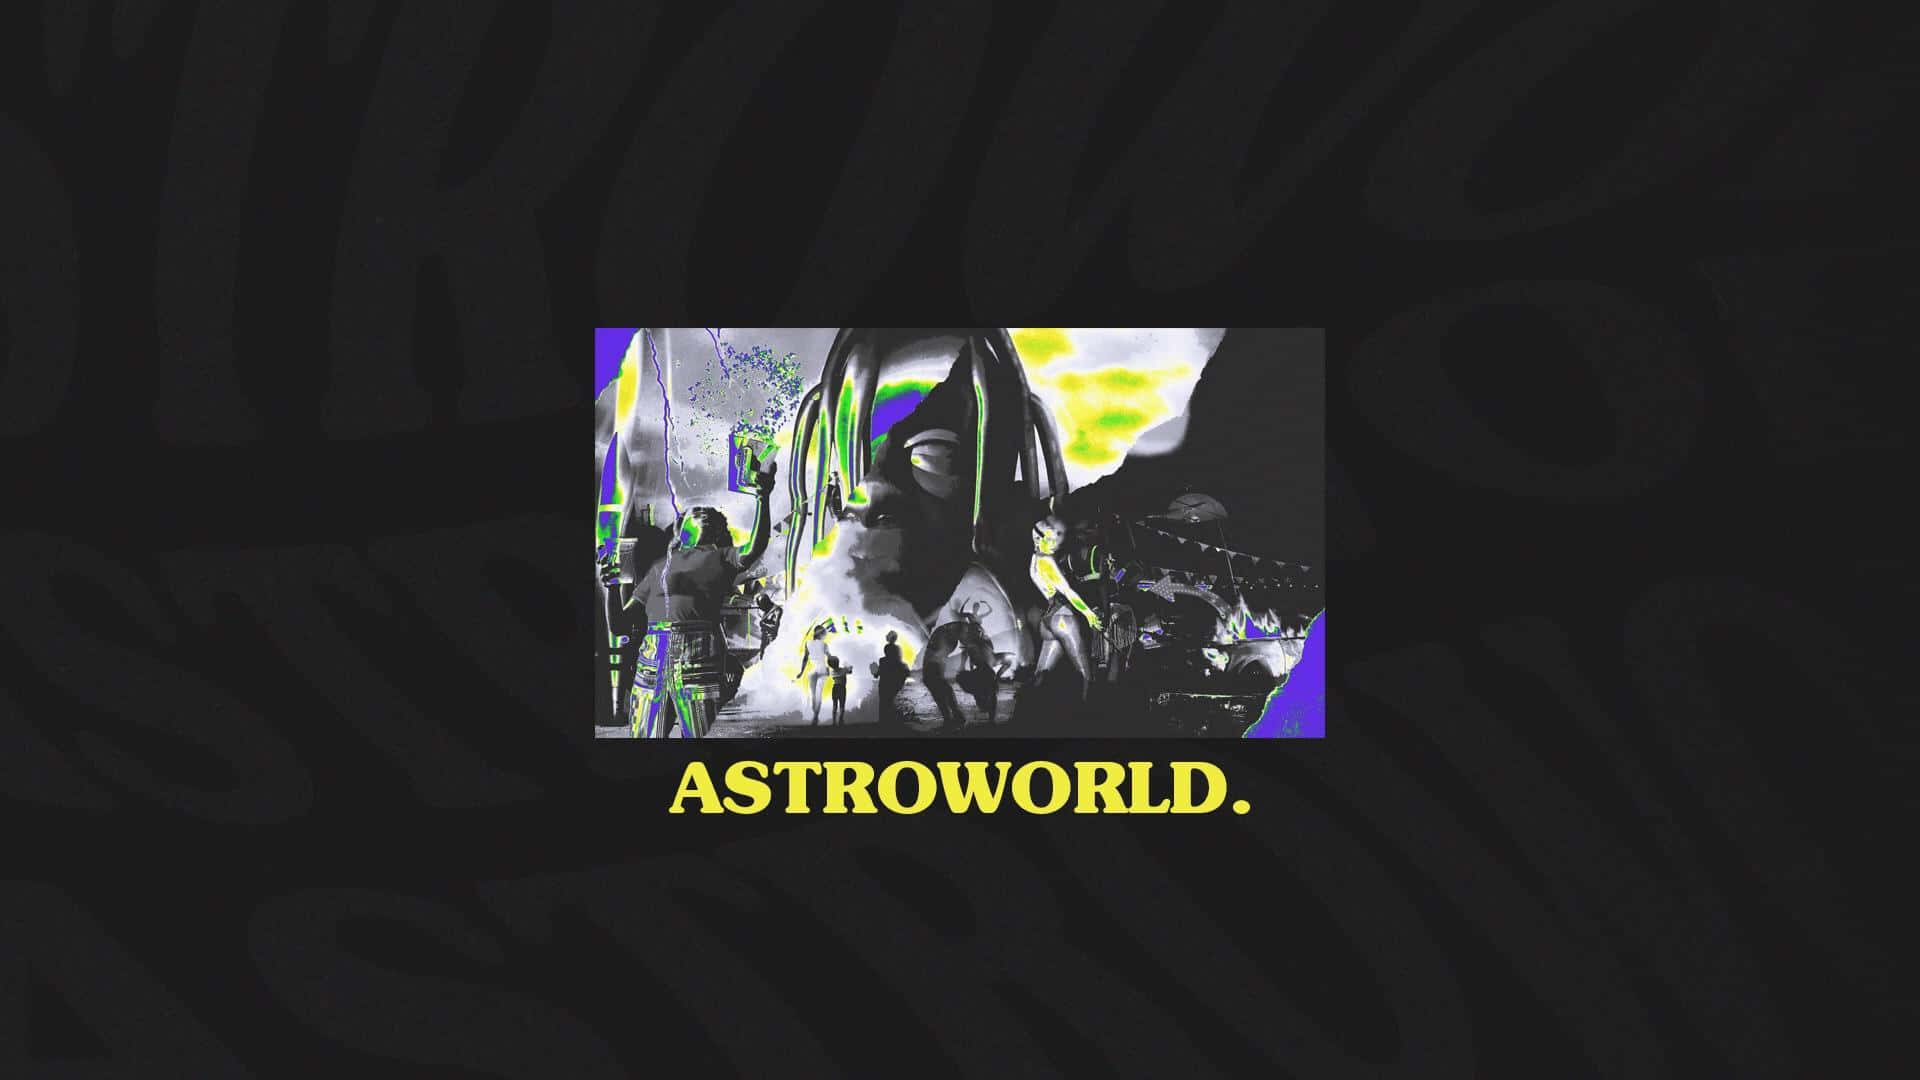 Welcome to Astroworld, the happiest place on earth